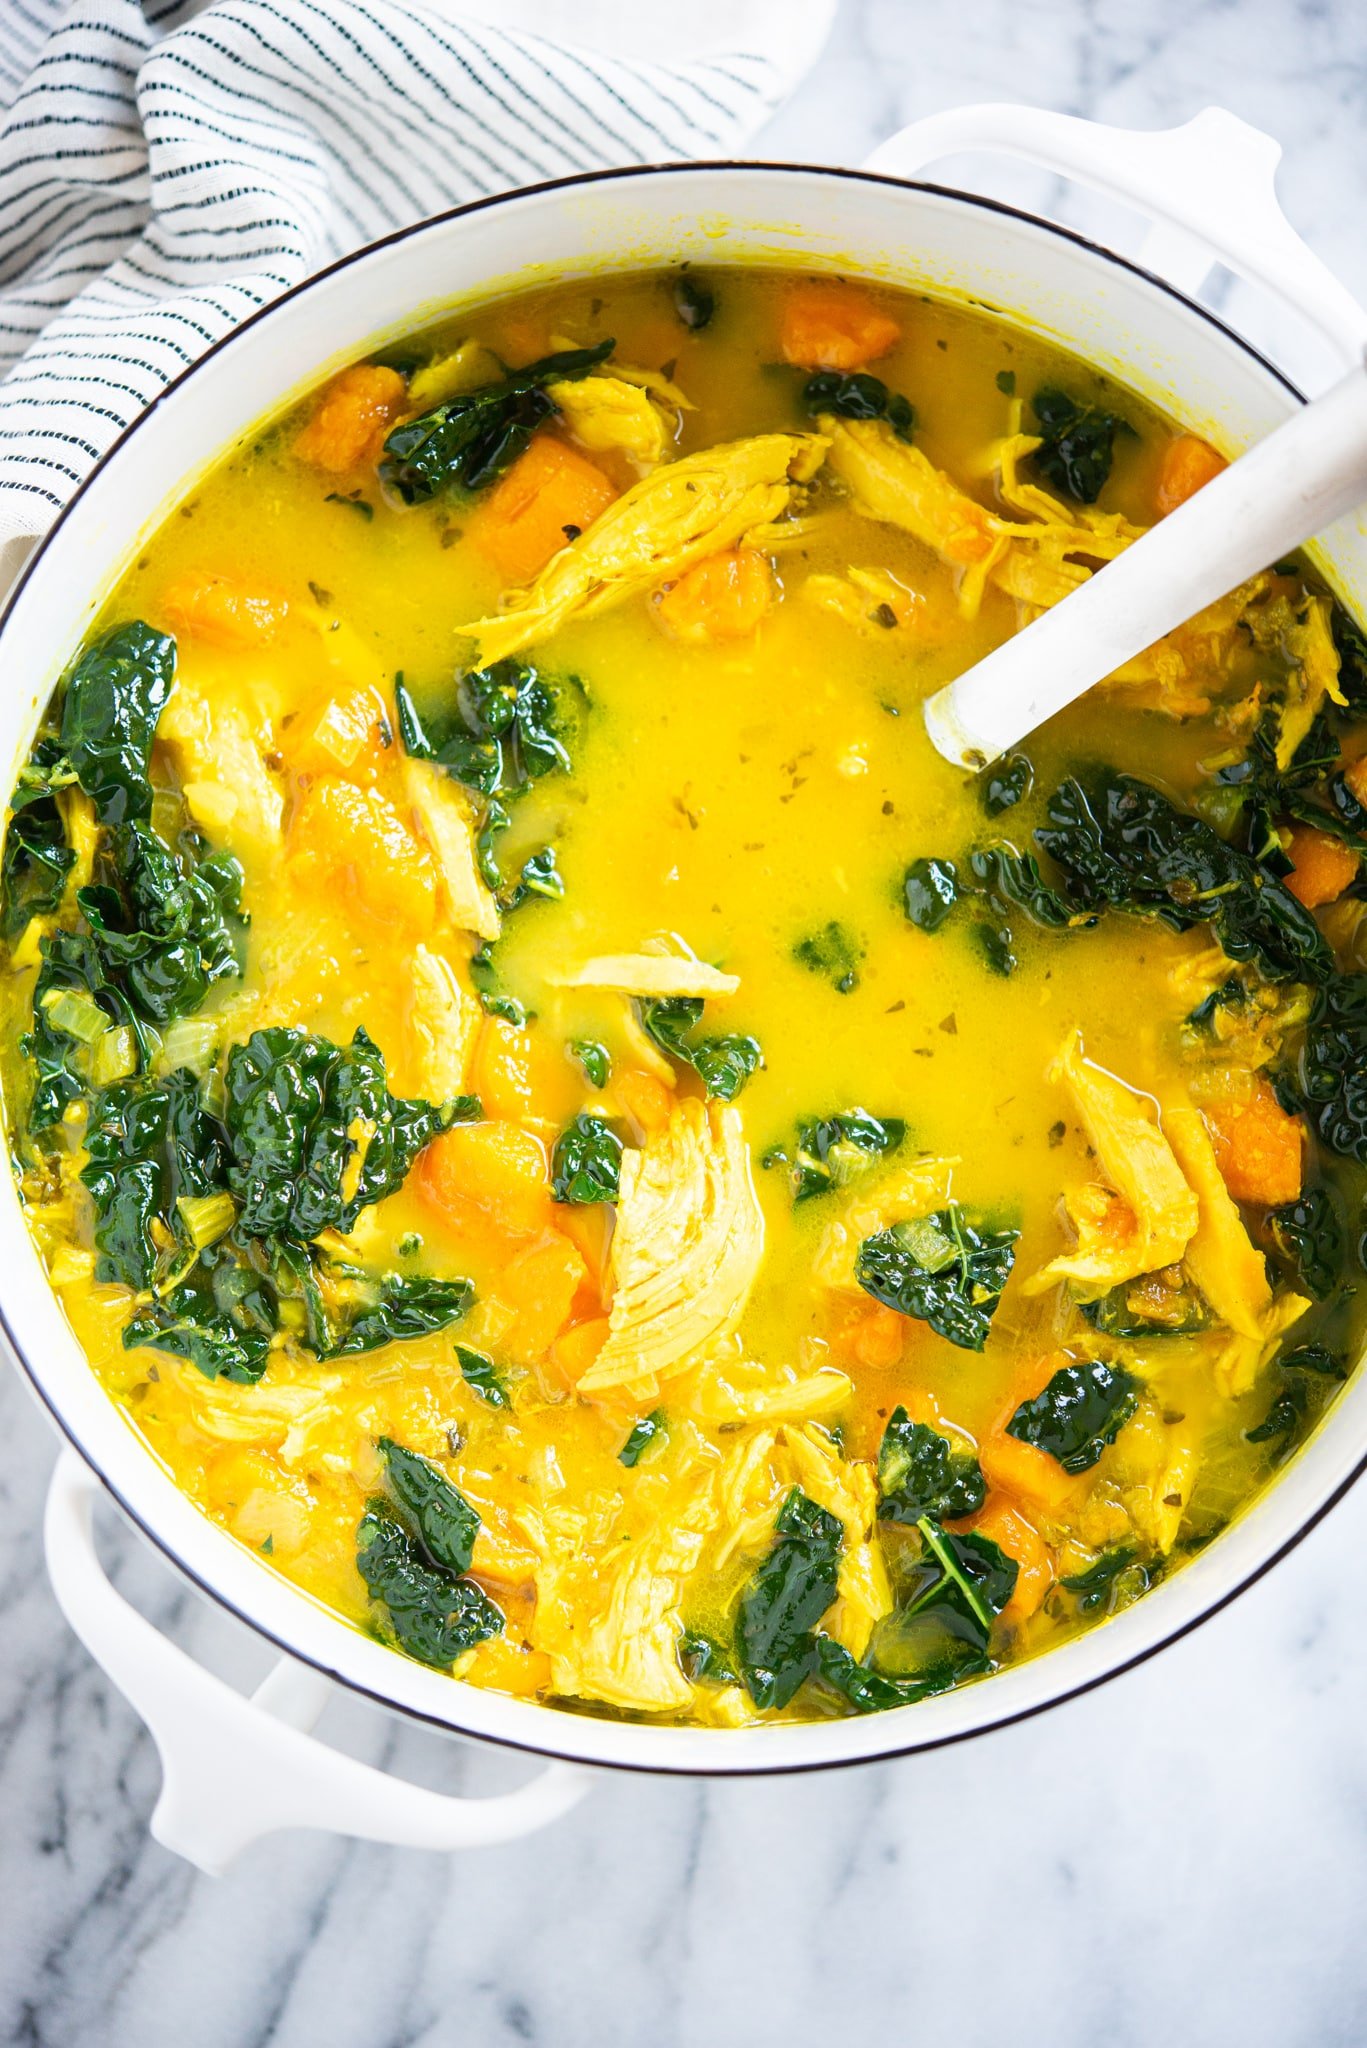 healing chicken soup with yellow turmeric broth, sweet potatoes, and kale in a white pot on a marble surface